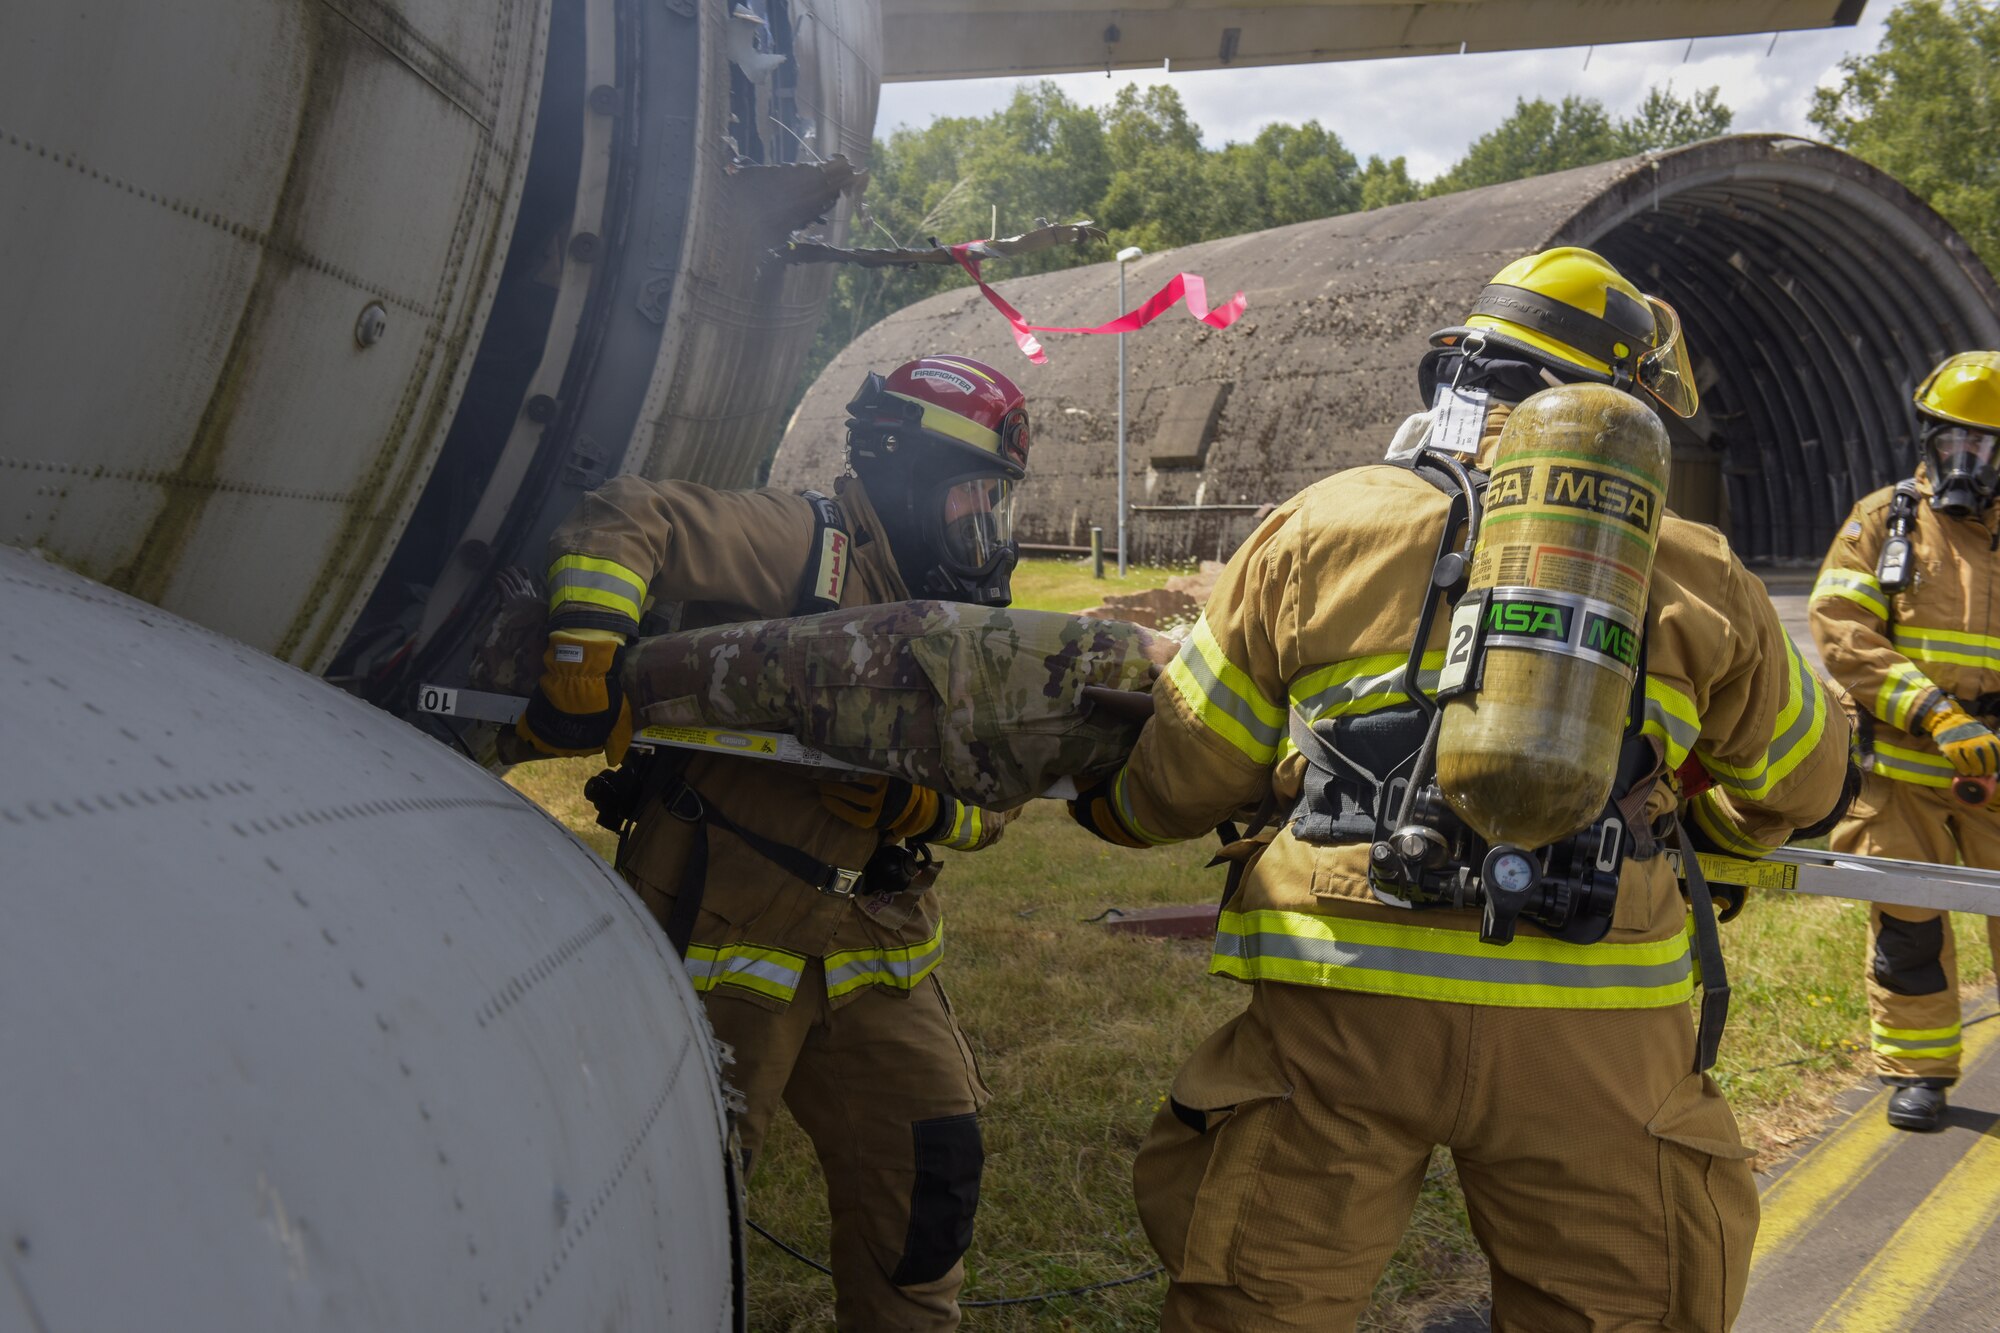 Firemen rescue a simulated casualty during a base exercise